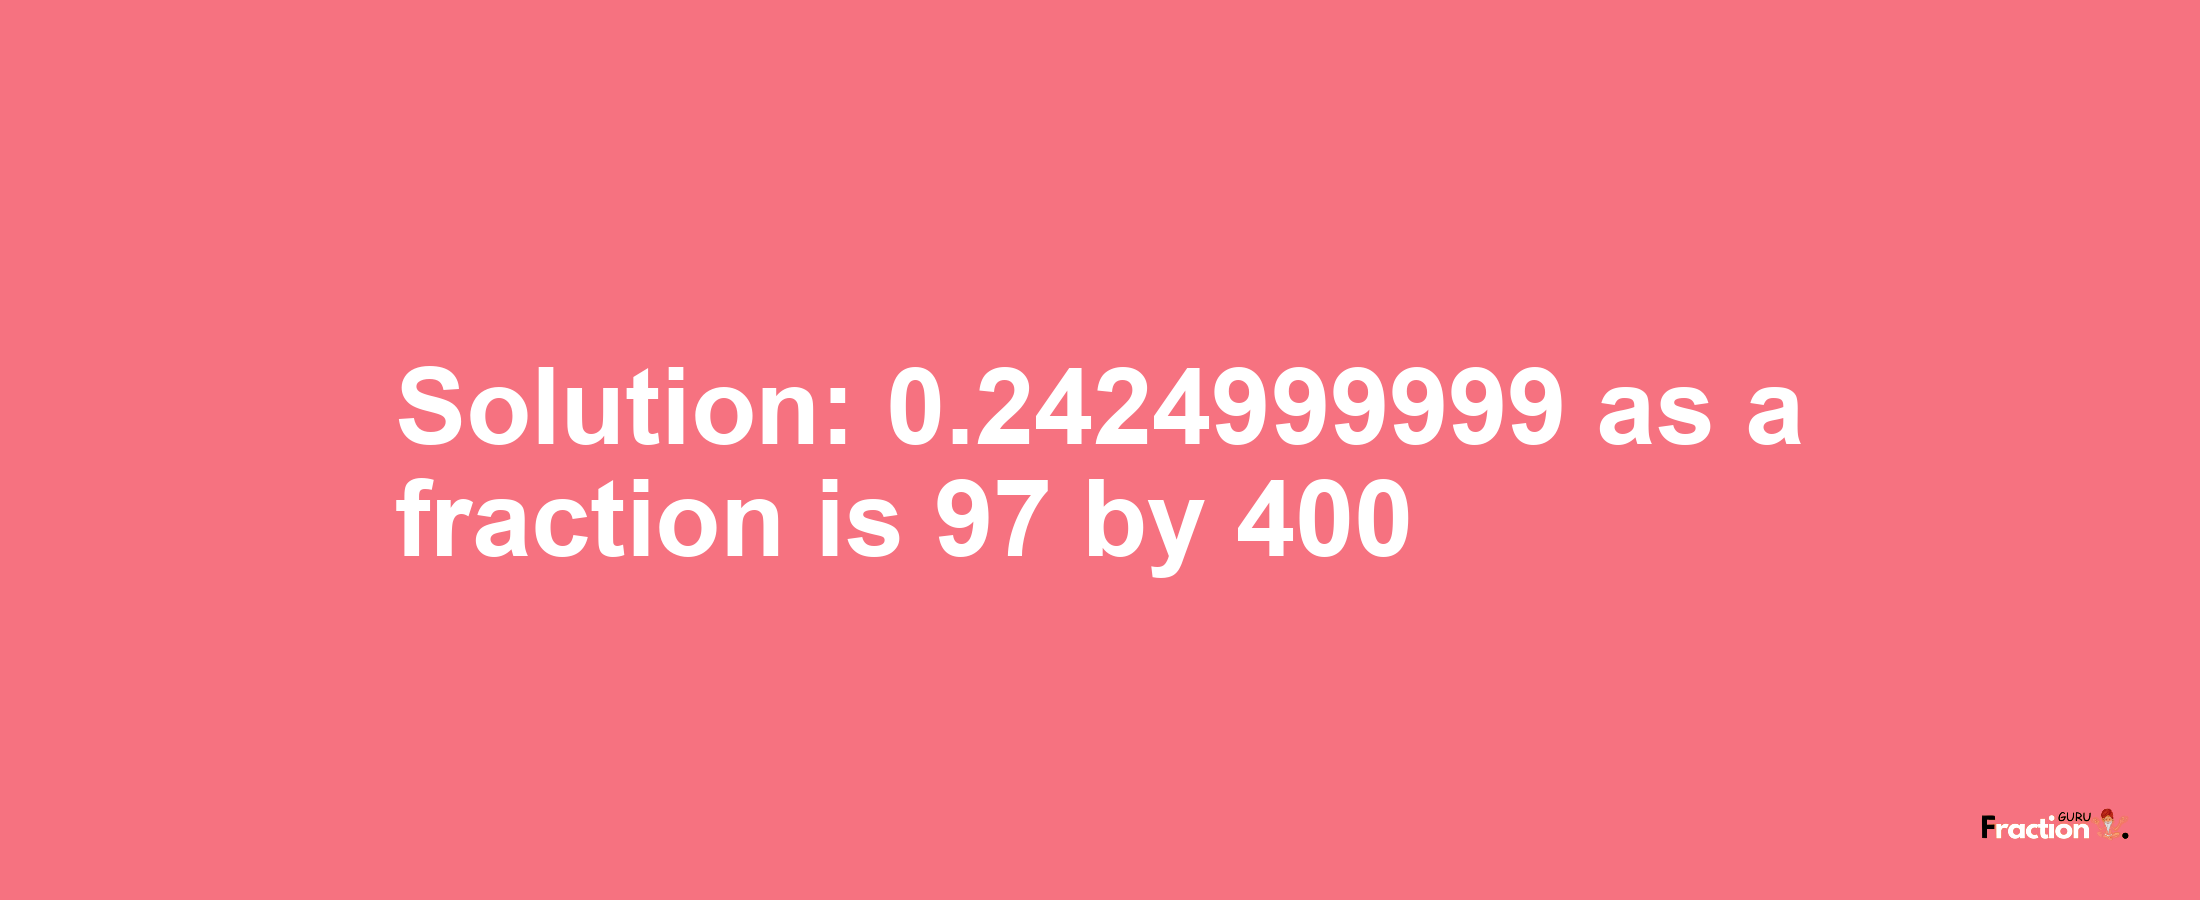 Solution:0.2424999999 as a fraction is 97/400